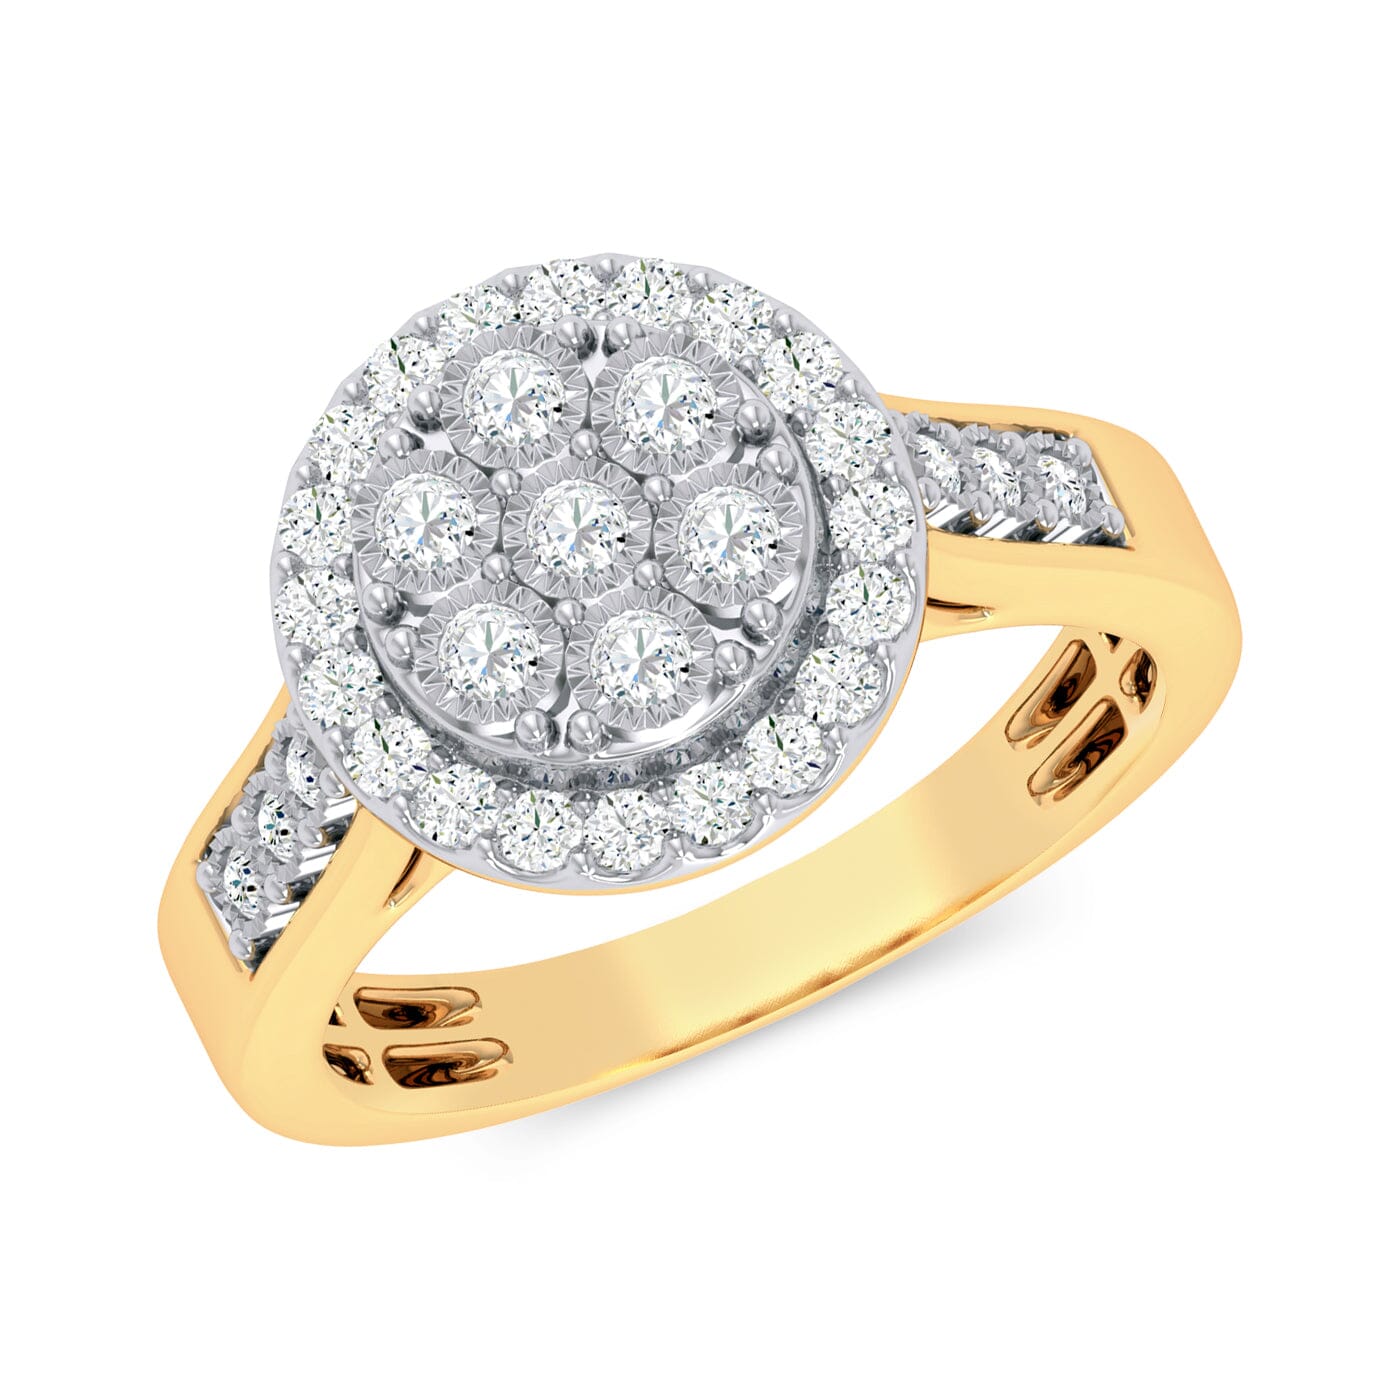 Miracle Halo Ring with 1/2ct of Diamonds in 9ct Yellow Gold Rings Bevilles 